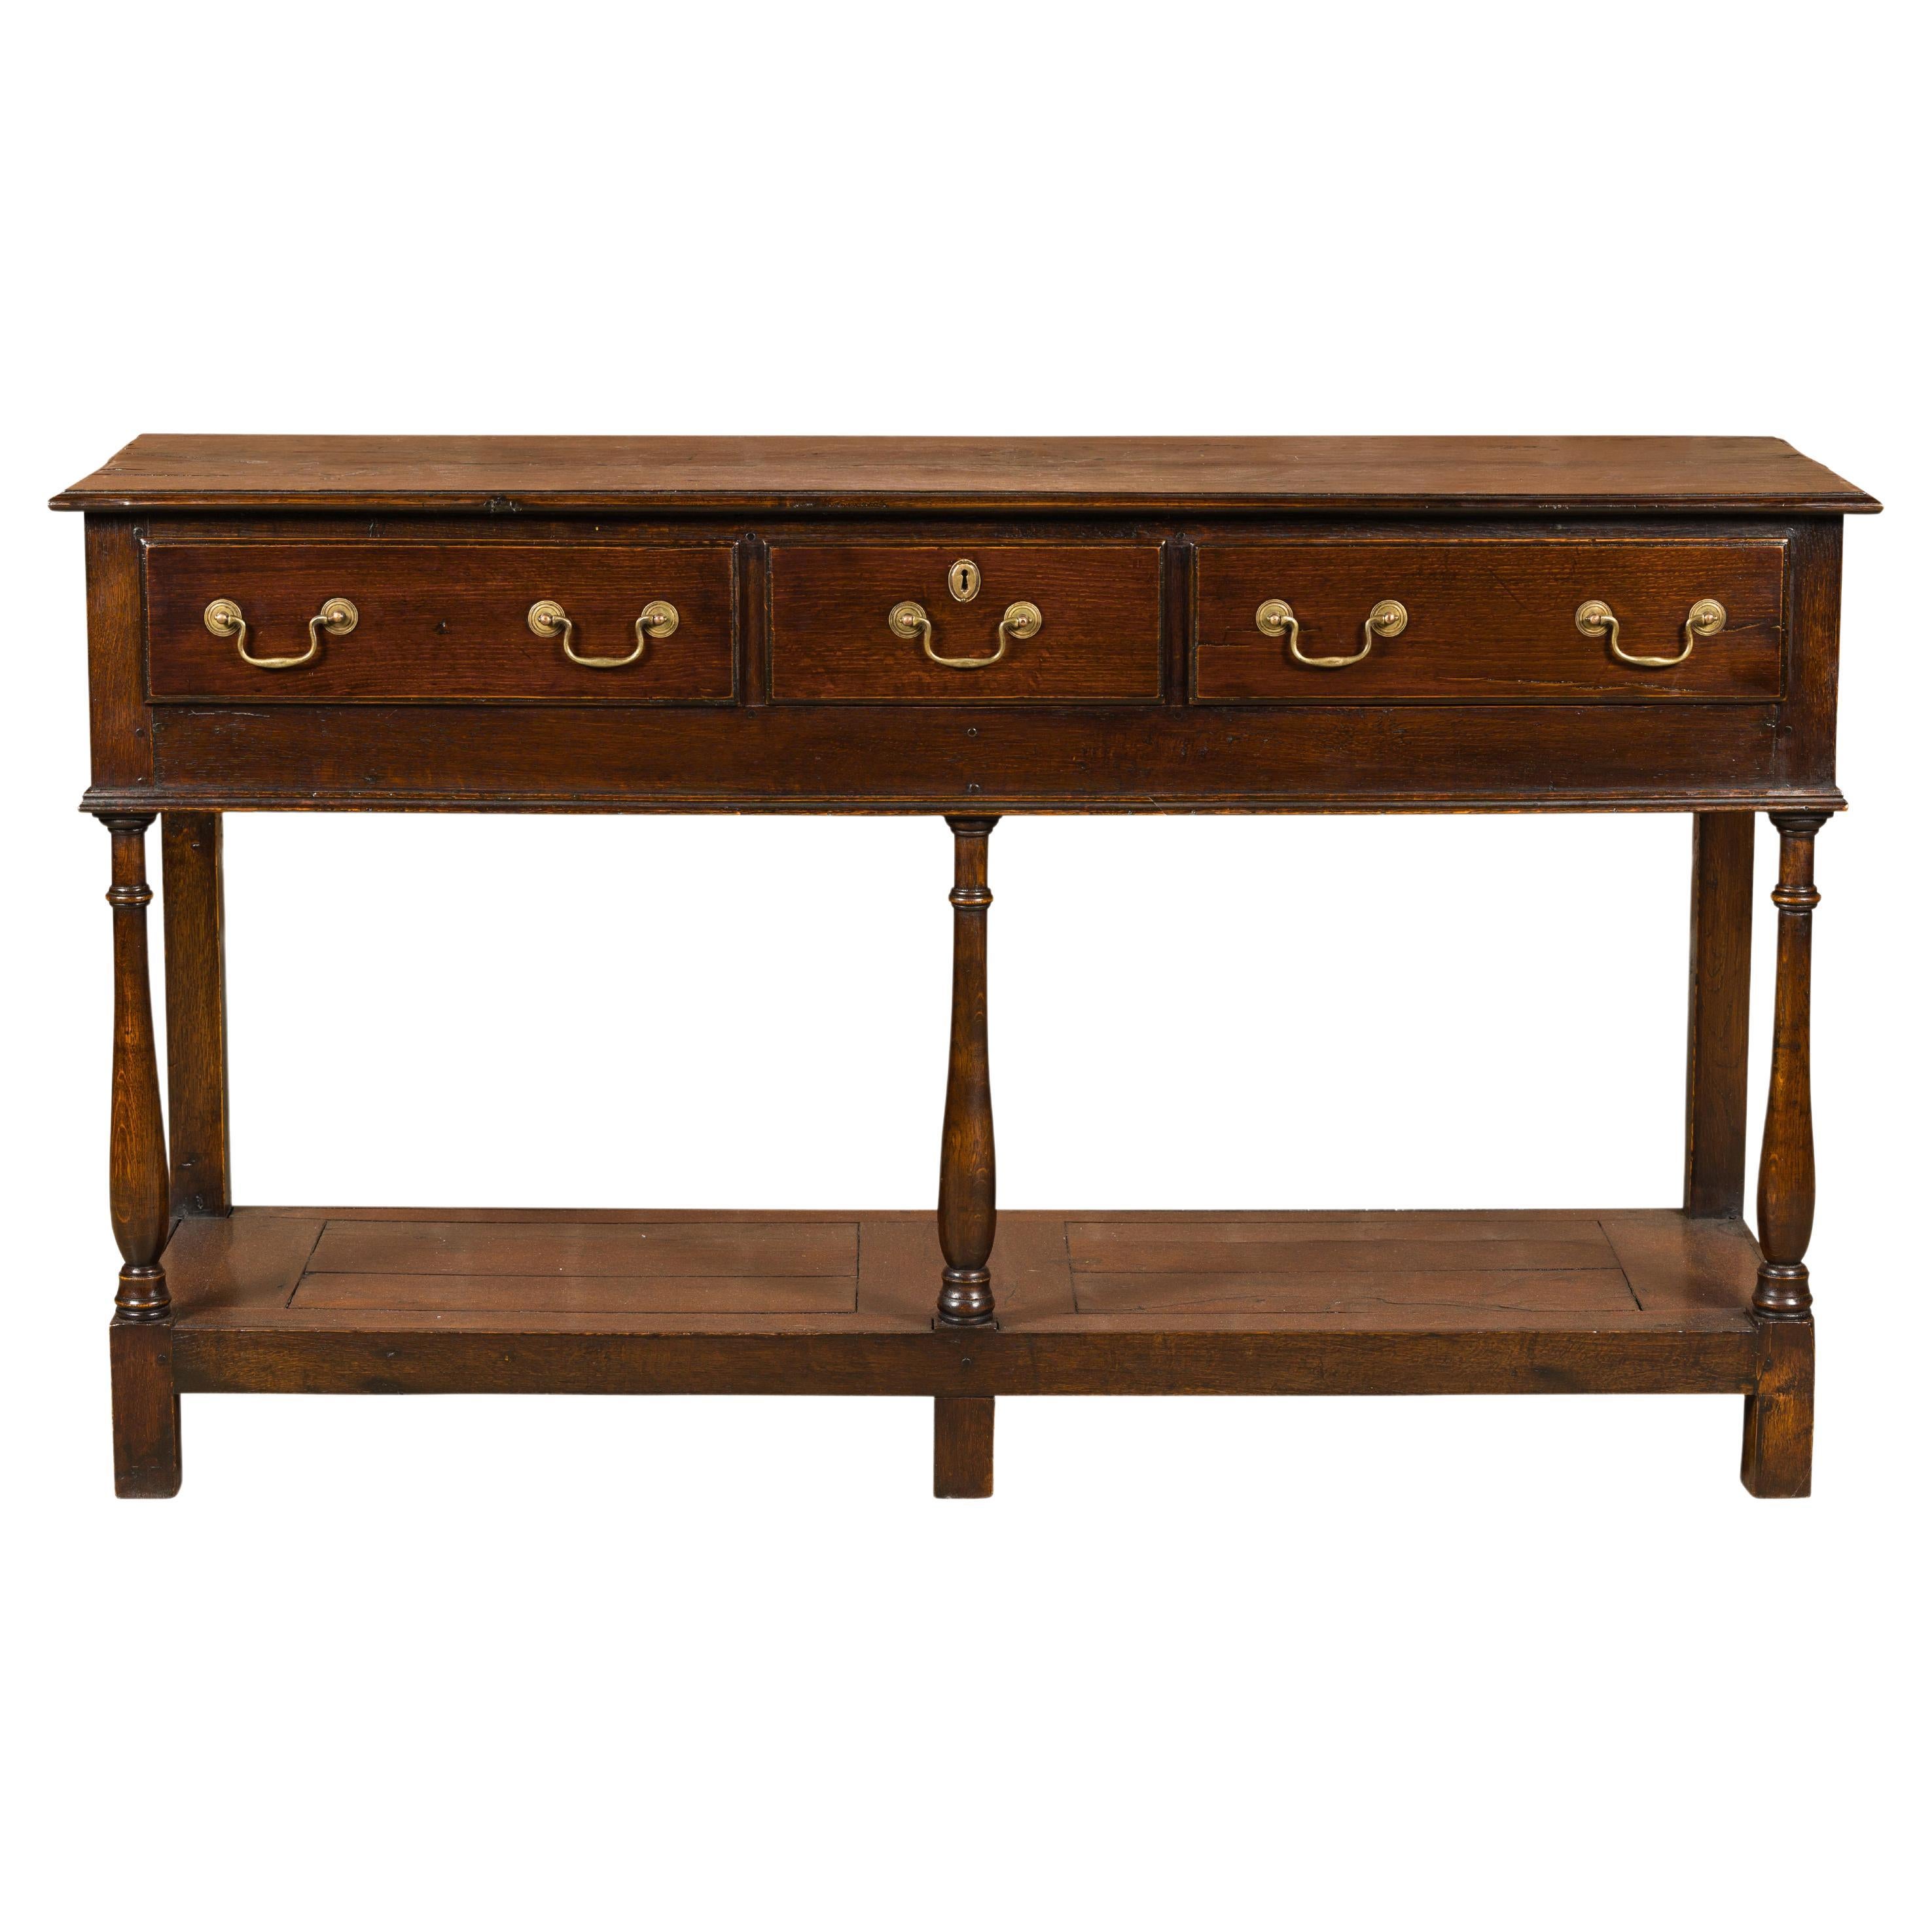 English 19th Century Oak Dresser Base with Three Drawers and Baluster Legs For Sale